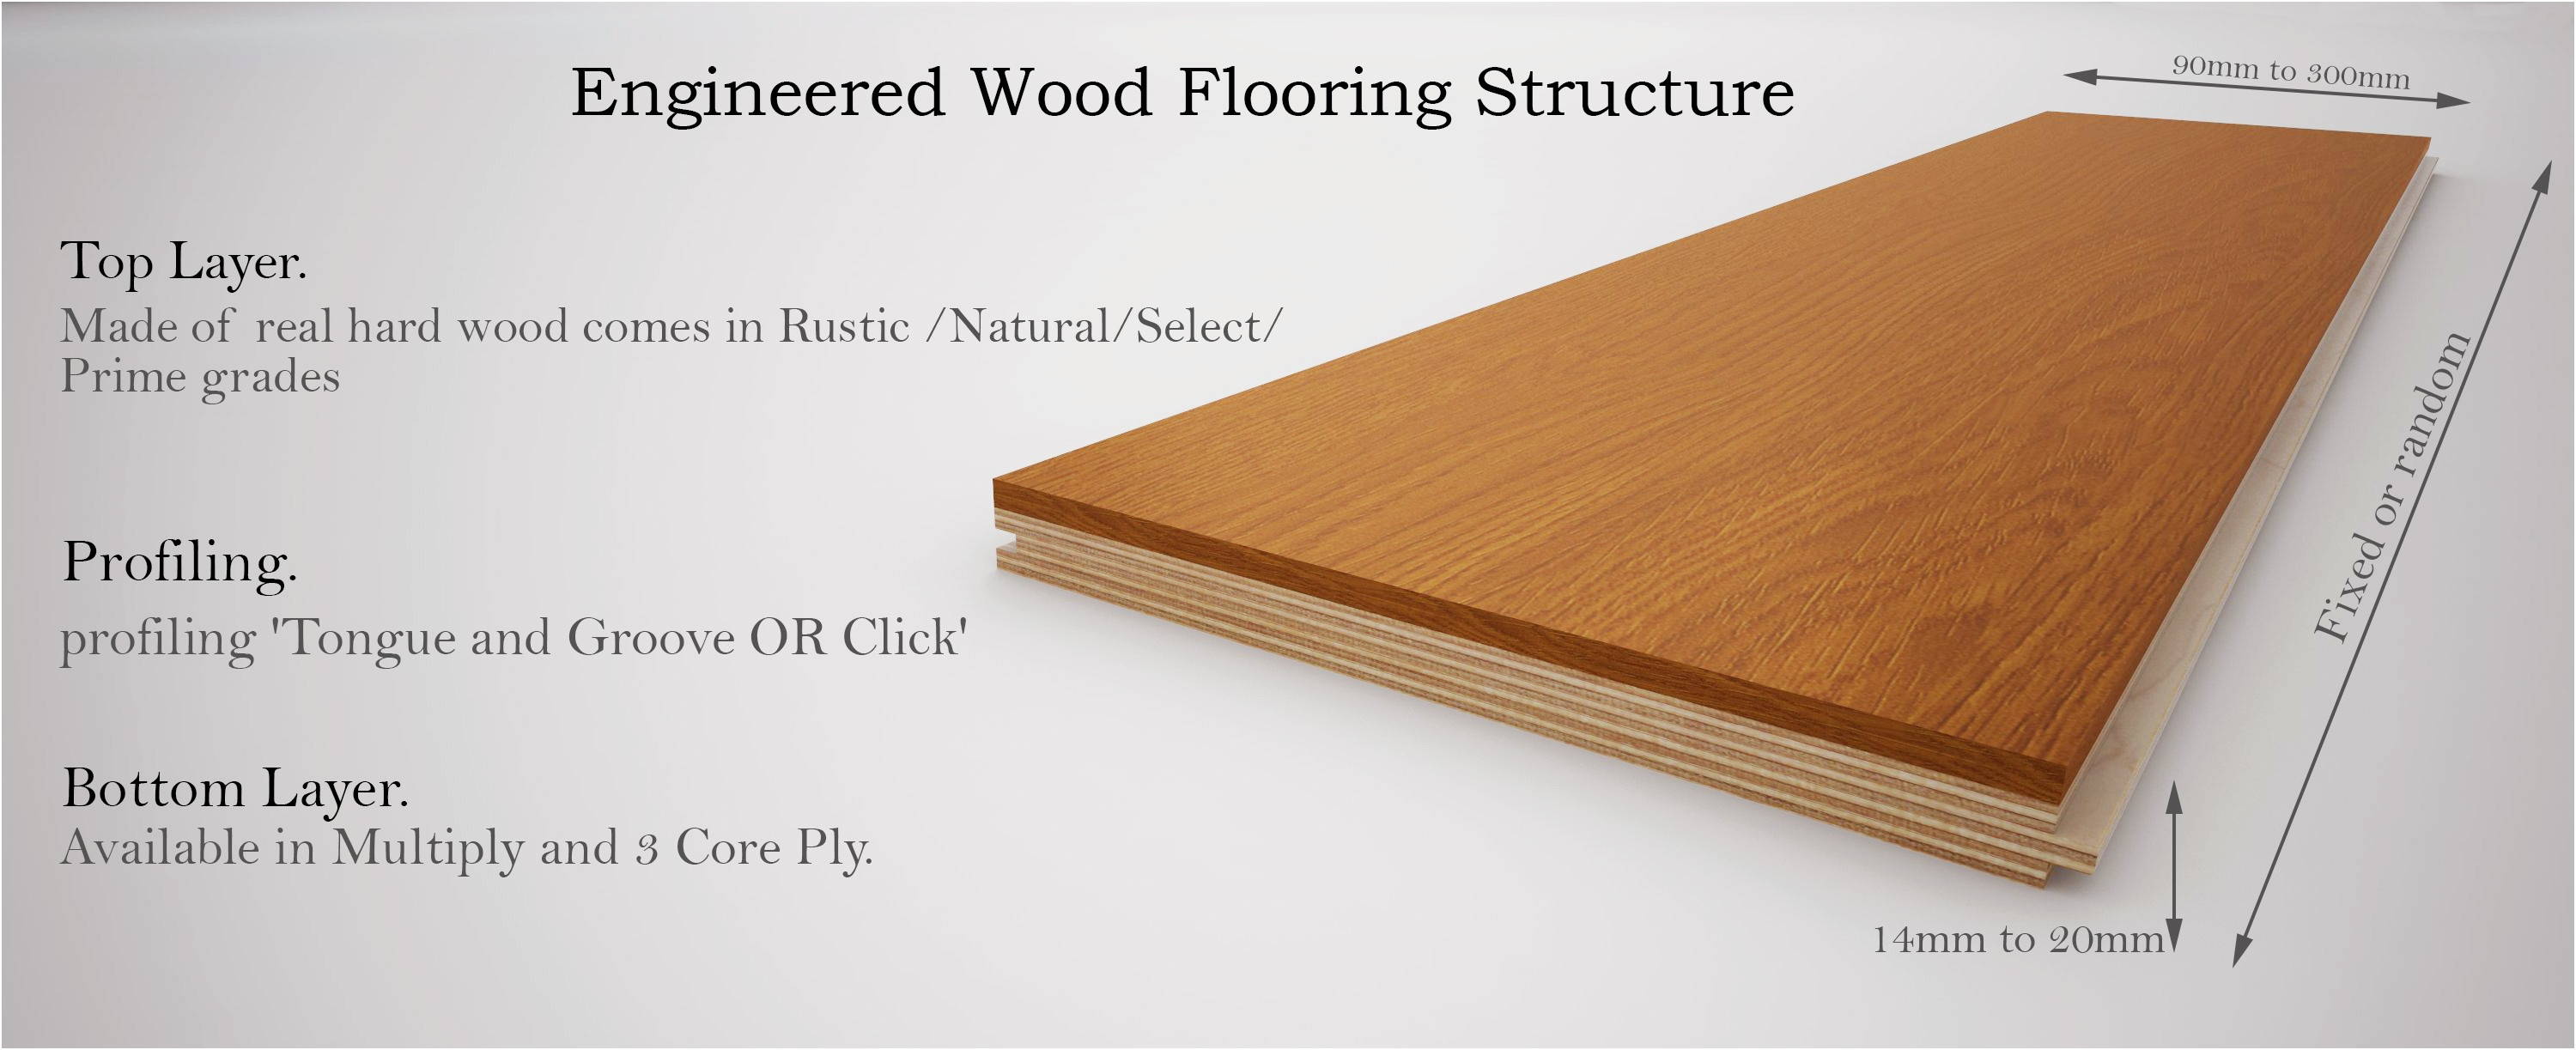 19 Awesome Costco Hardwood Flooring Cost 2024 free download costco hardwood flooring cost of costco laminate wood flooring review lovely engineered hardwood with regard to costco laminate wood flooring review best of kitchen beautiful engineered wood